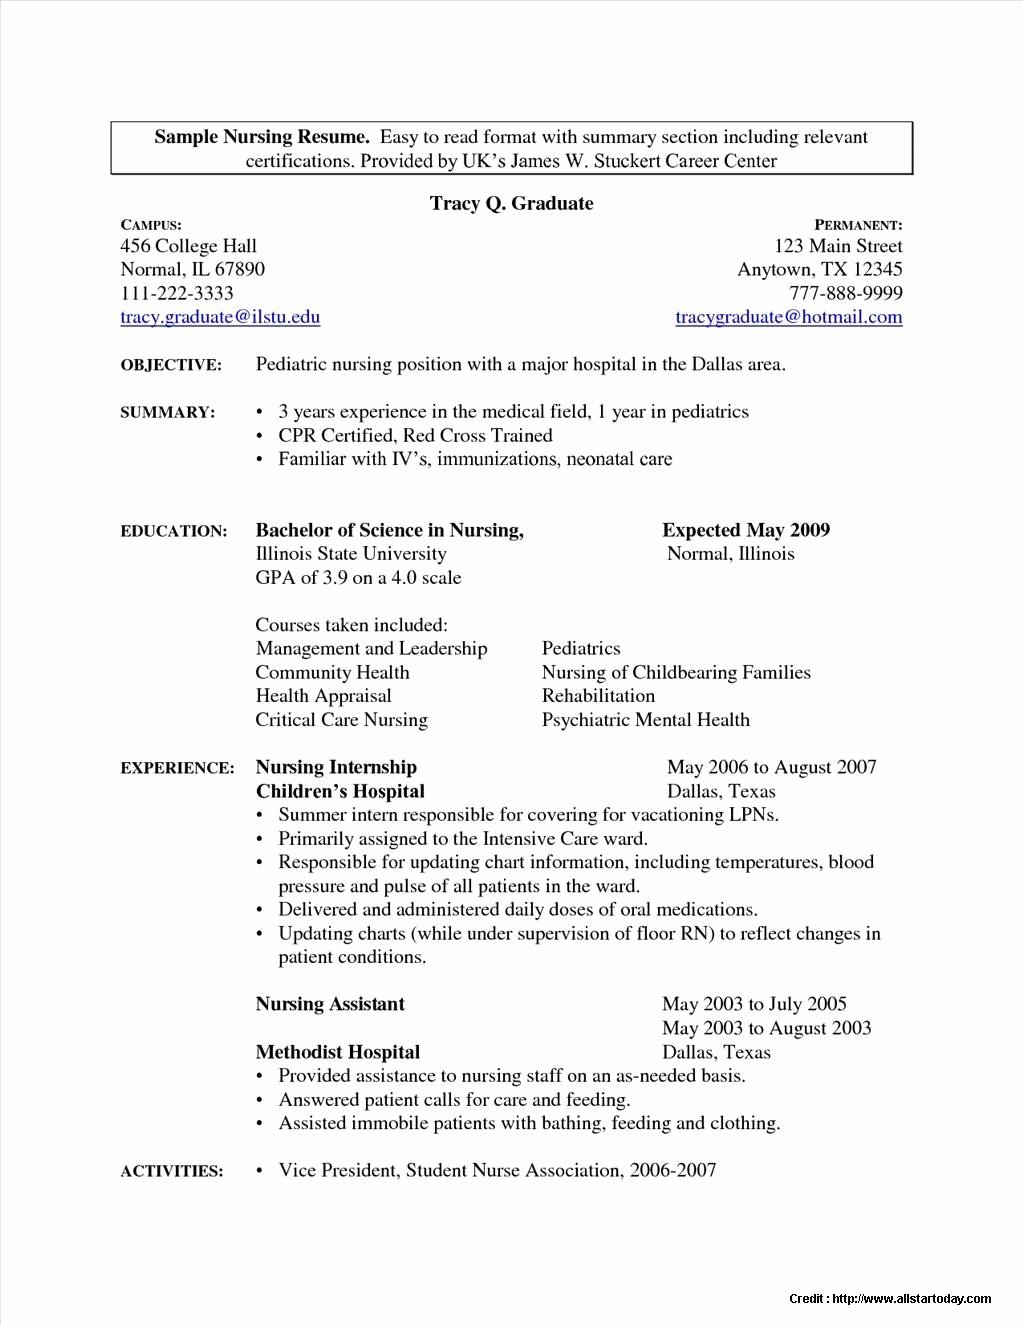 Sample Resumes for Medical assistant Students Resume